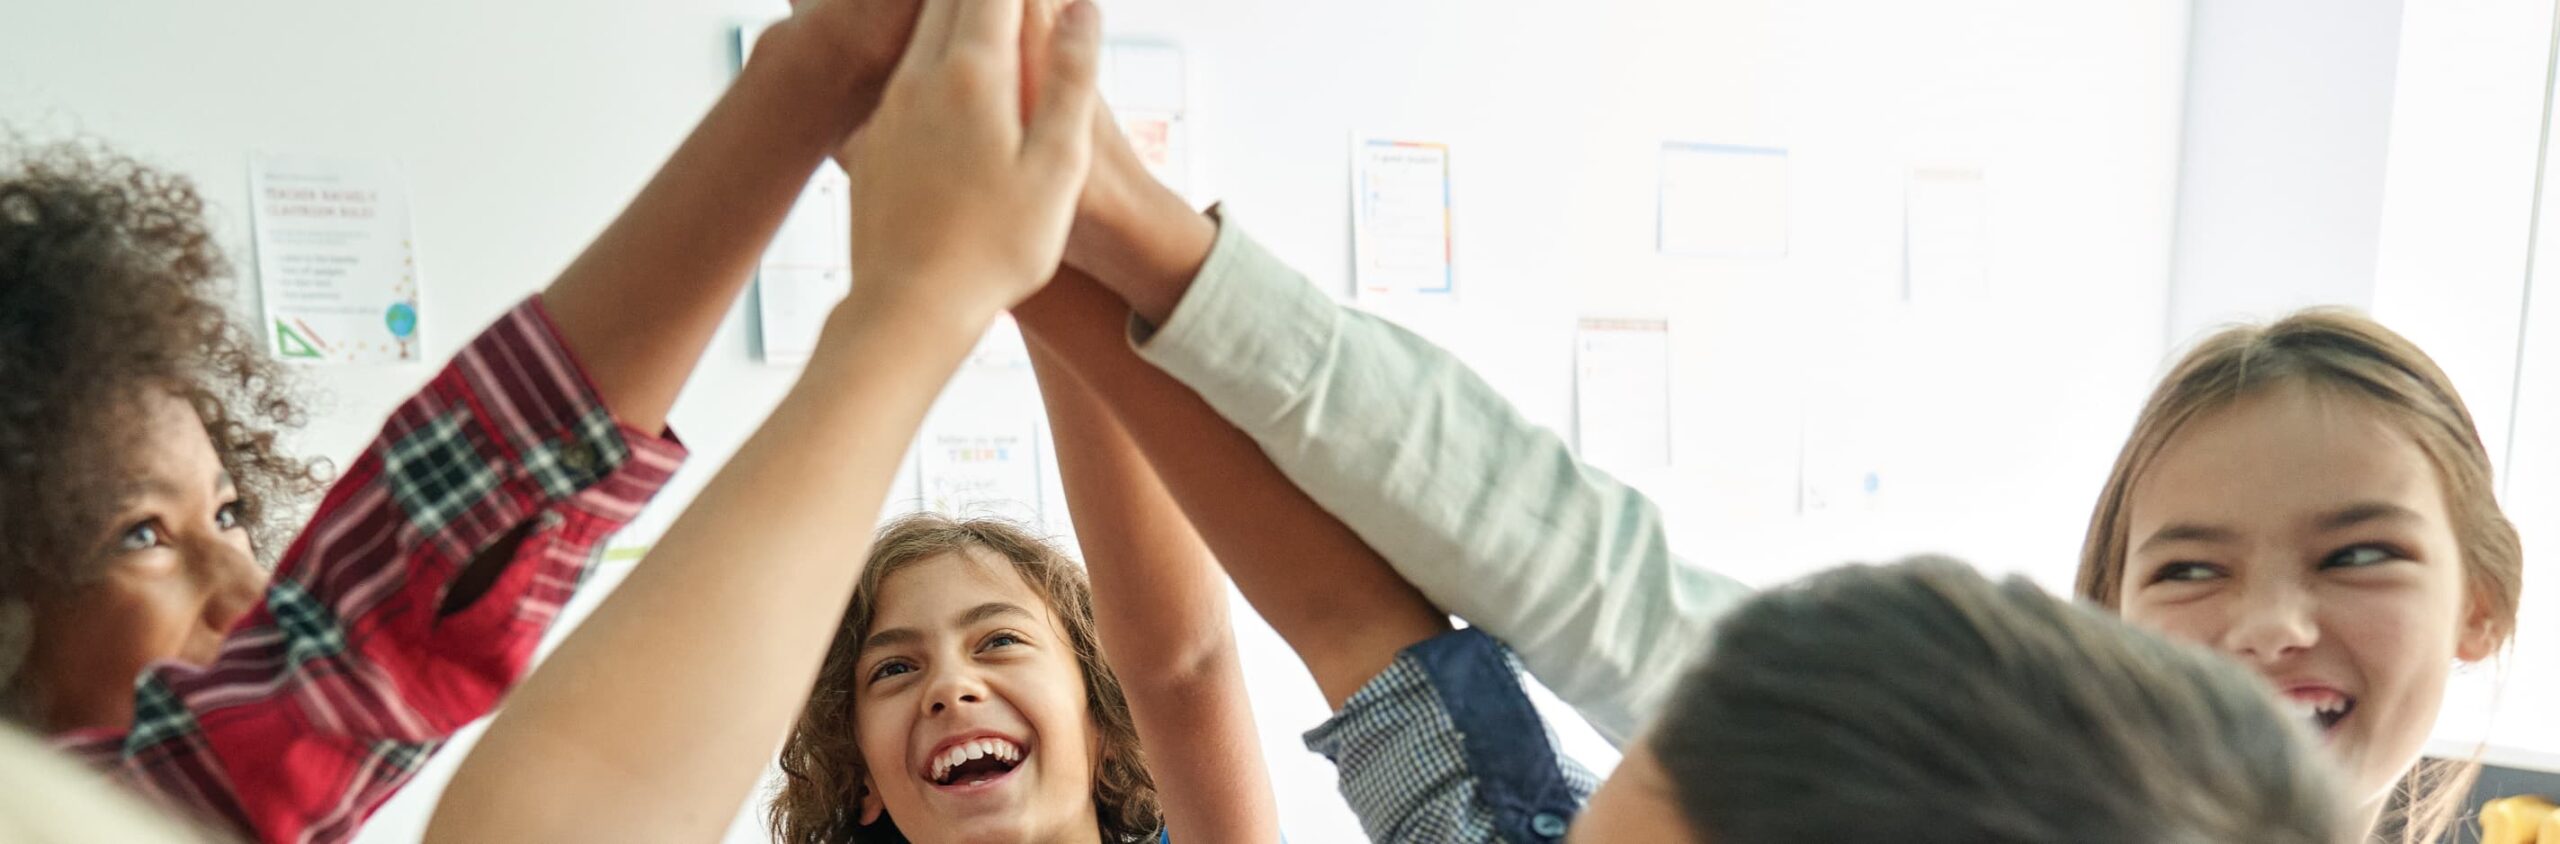 4 useful tips to create a welcoming, inclusive classroom